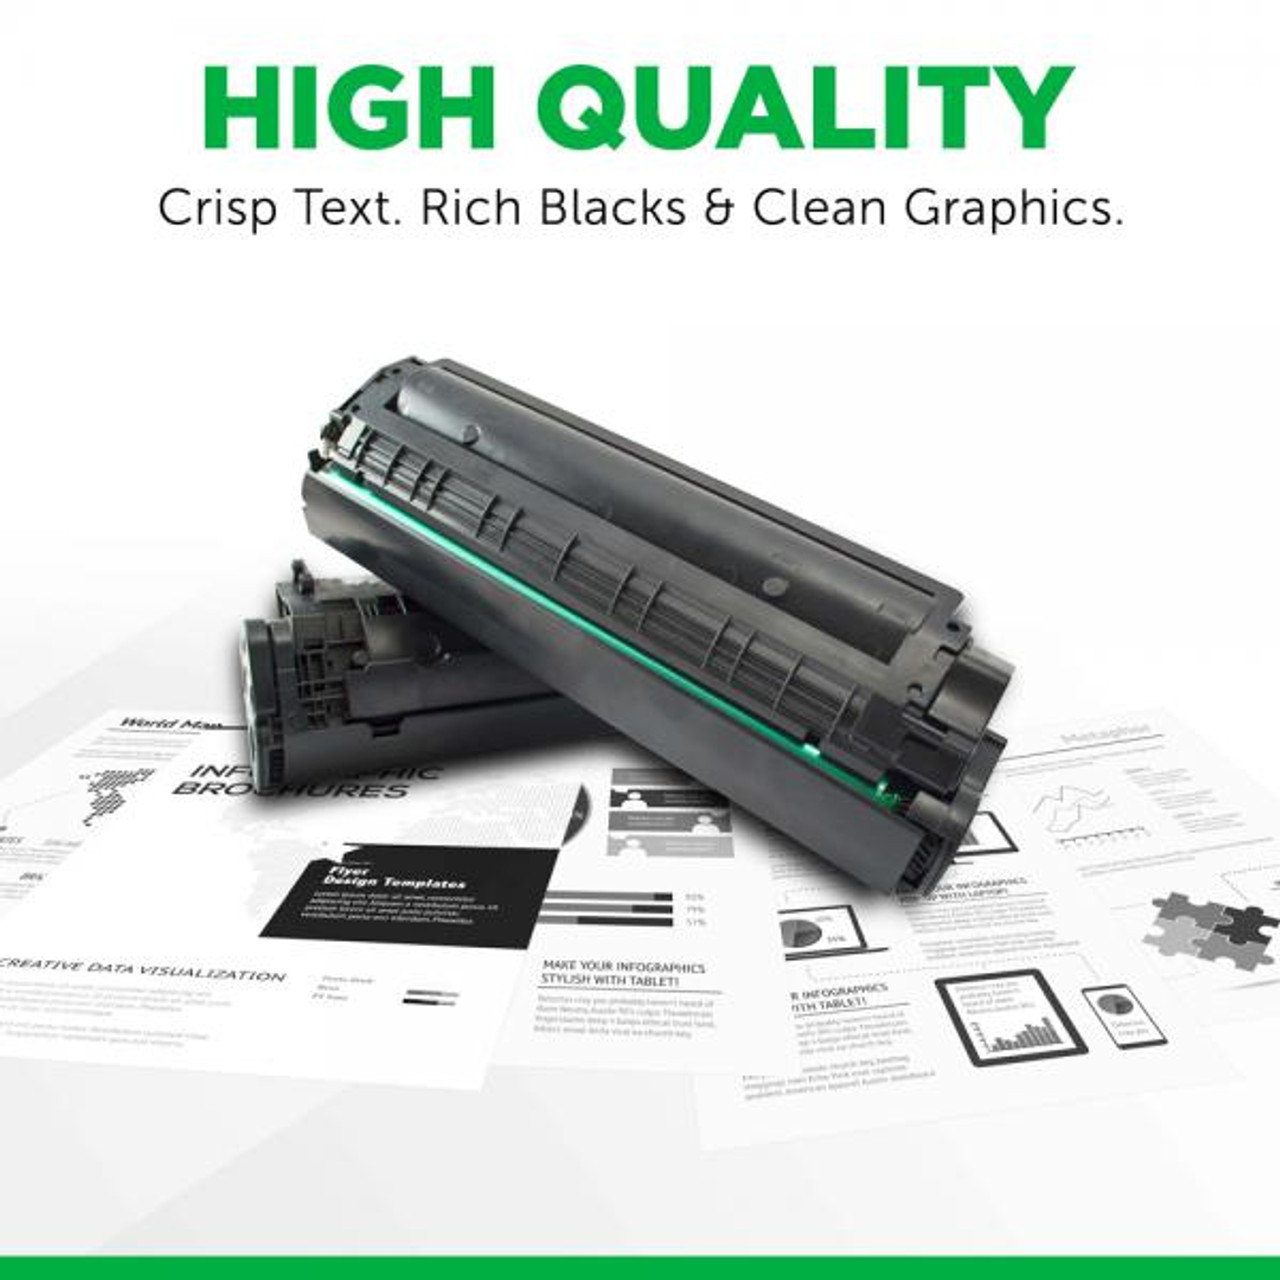 High Yield Toner Cartridge for Dell 3330/3333-4